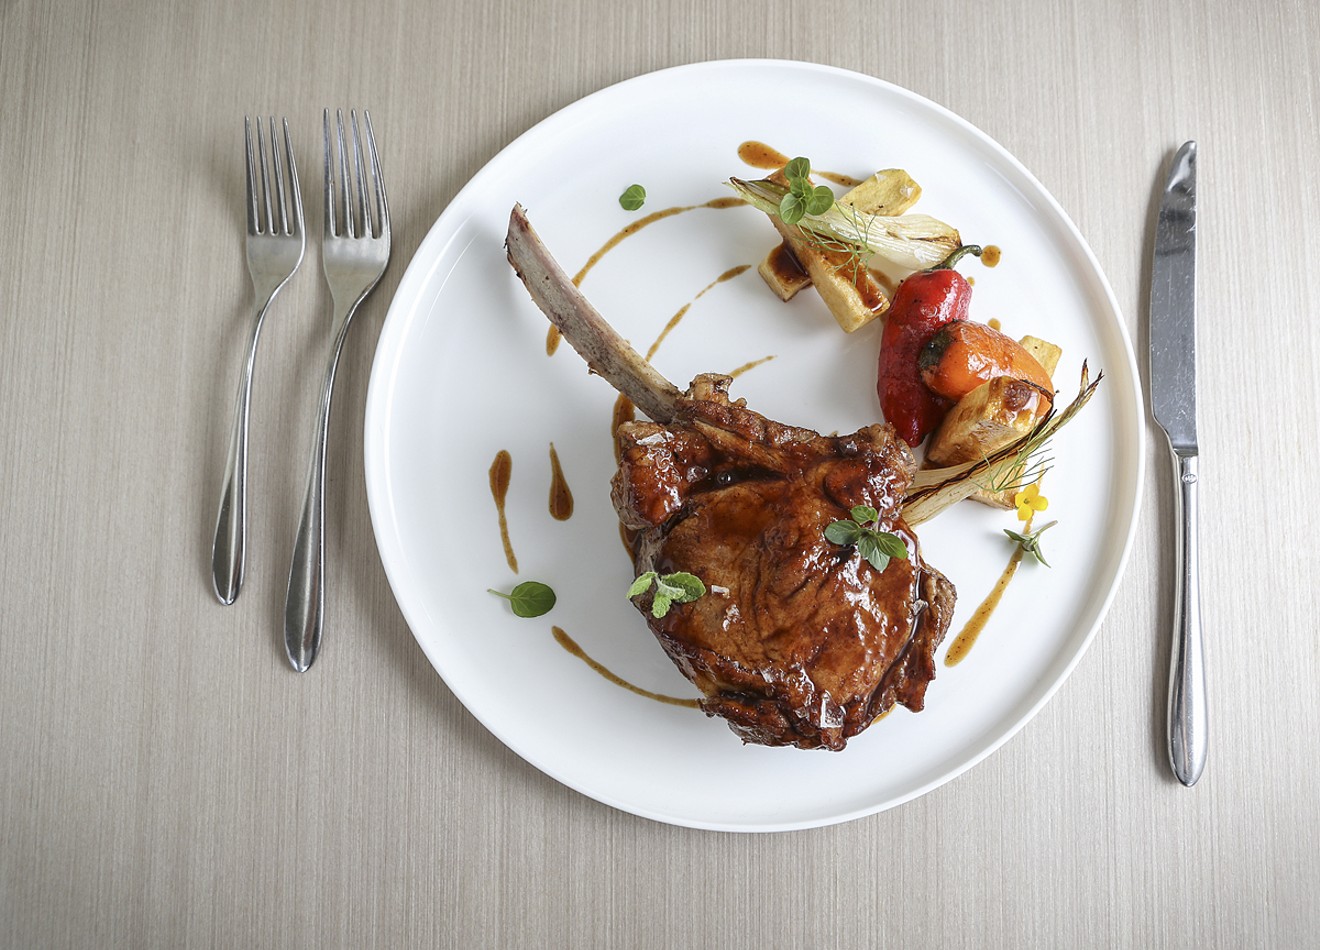 Glazed veal chop. See more photos from Forte dei Marmi here.